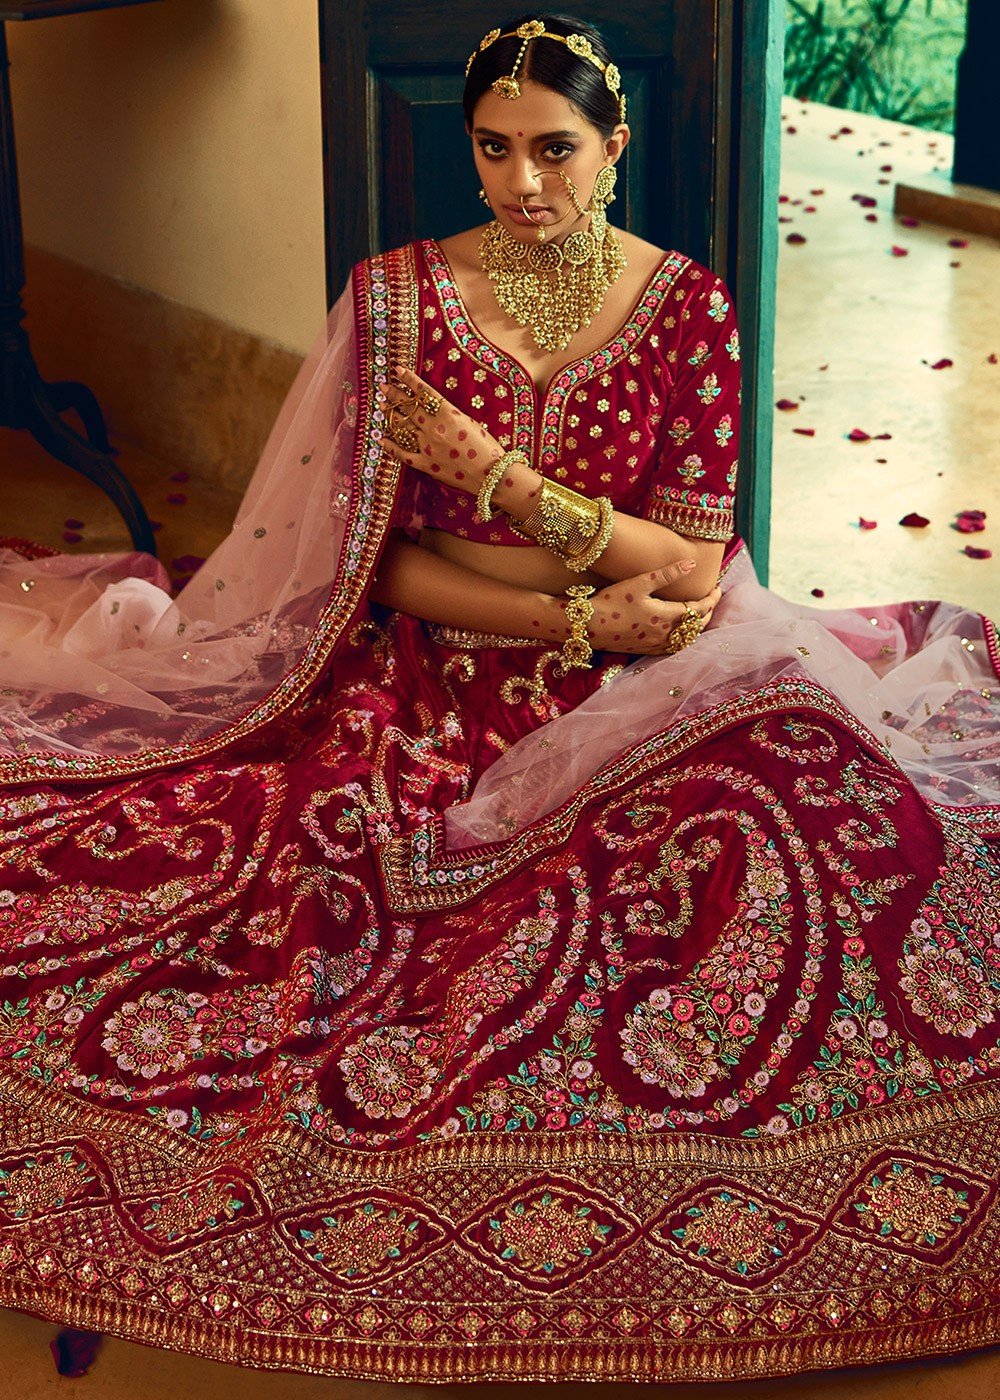 Contrasting Jewellery Ideas To Pair & Wear With Your Red Lehenga! |  WedMeGood